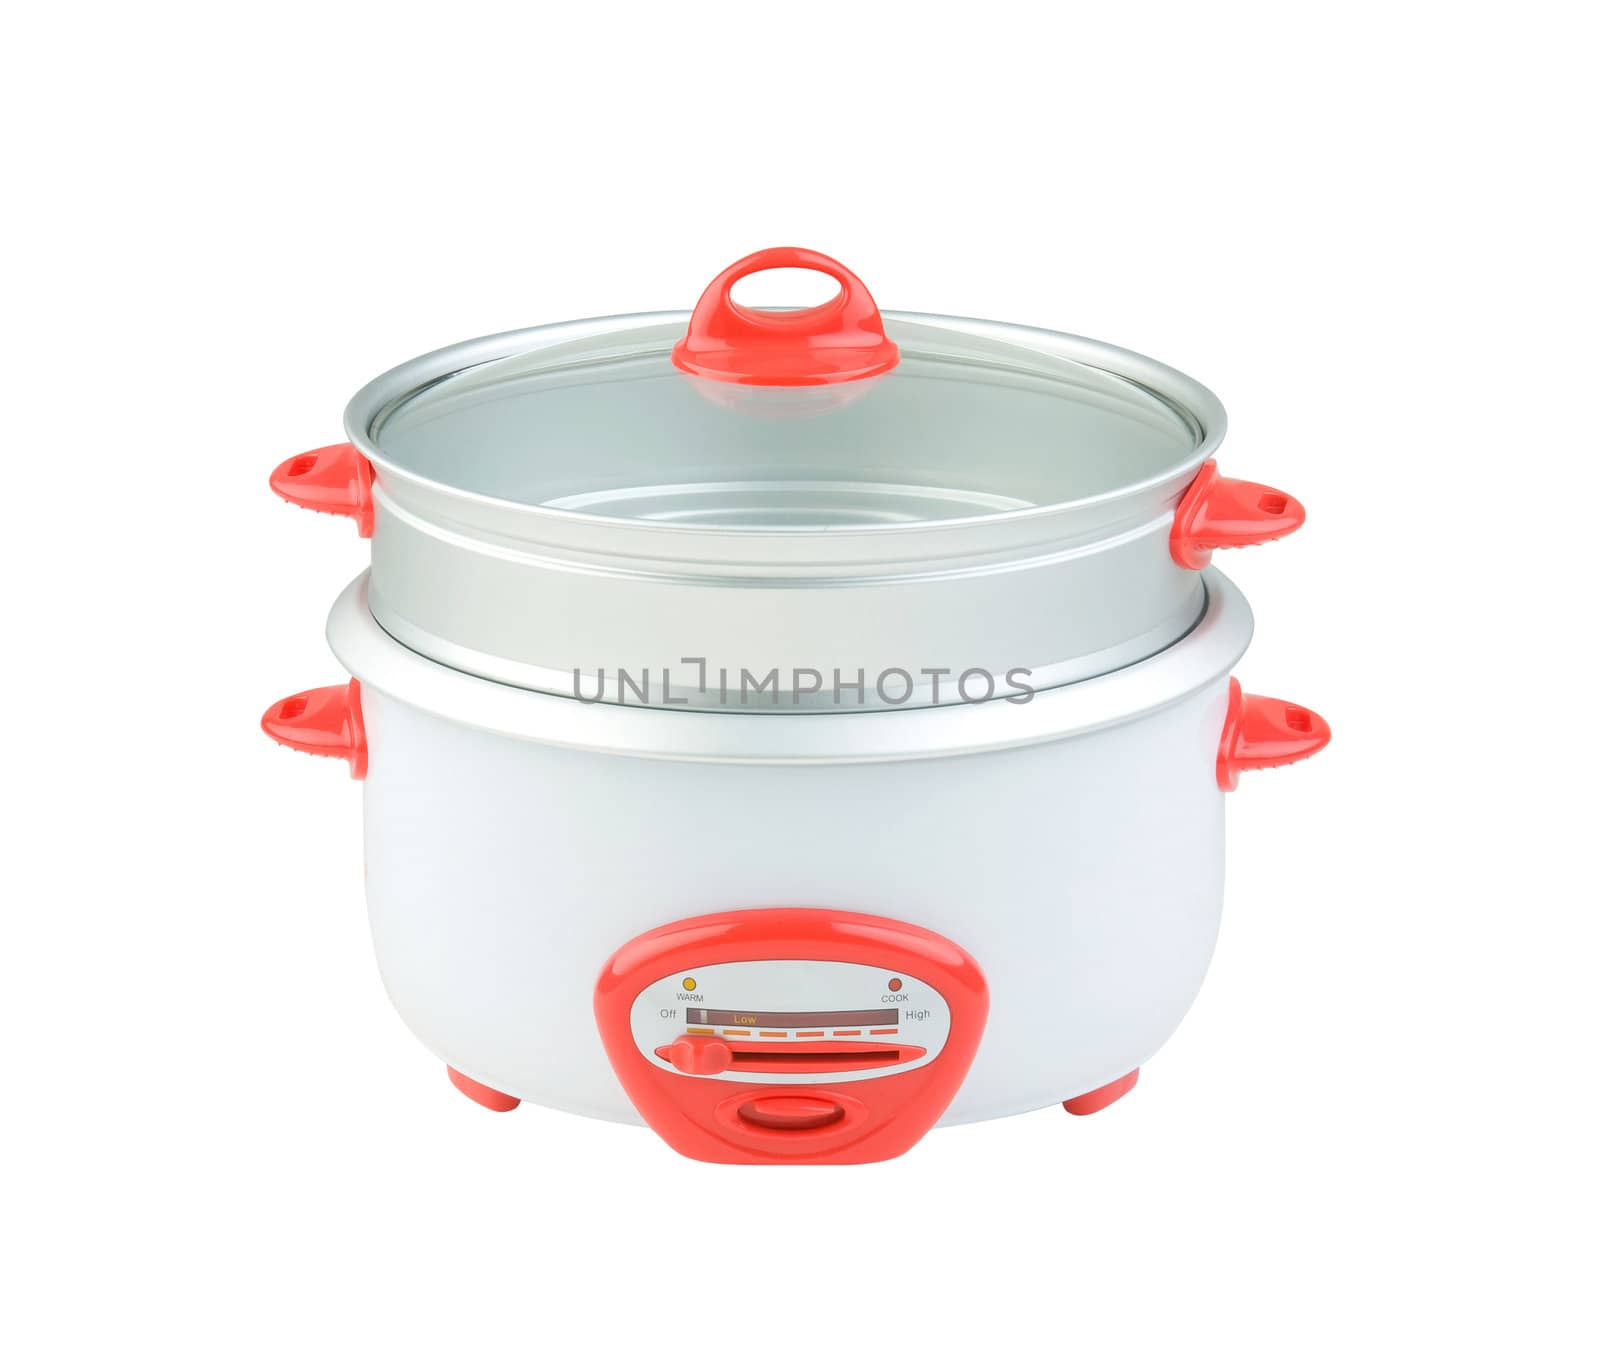 double tray electric steaming pot for cooking food, isolated